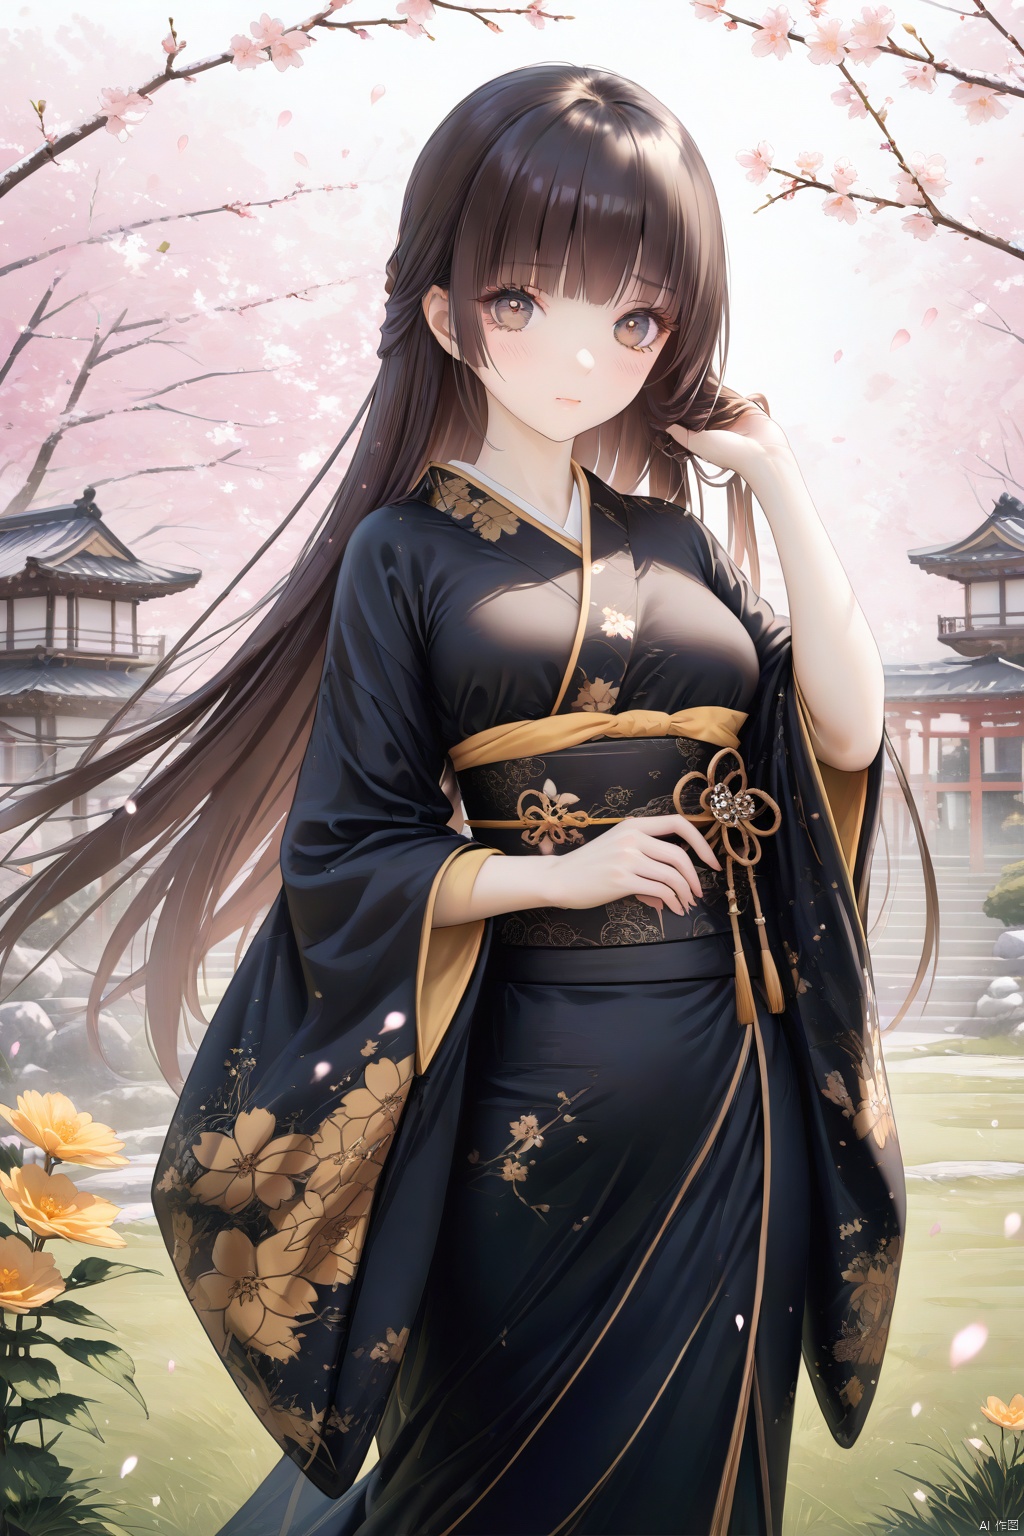 PVC, (masterpiece), (best quality),(highly detailed), (ultra-detailed),illustration,depth of field,(extremely detailed CG unity 8k wallpaper),sakura,trees,outdoor,flying_petals,1girl,Yamato Nadeshiko,(mature:1.5),elegant,graceful,classy,dignified,Medium_Shot,(delicate_face),looking at viewer,medium_chest,((darkblack_hair)),blush,(sad),closed_mouth,big_eyes,(neat_bangs:1.3),(hime_haircut),((very_long_hair)), neat_straight_hair,tareme,([black:golden:0.7] kimono),golden flower patterns on black kimono,darkbrown_eyes,delicate_eyelashes,boobs,medium_breasts,long_legs,darkblack_pupils,hand in own hair,(delicate_eyes),(delicate_eyelashes),standing_straight,standing on grass,Japanese-style garden